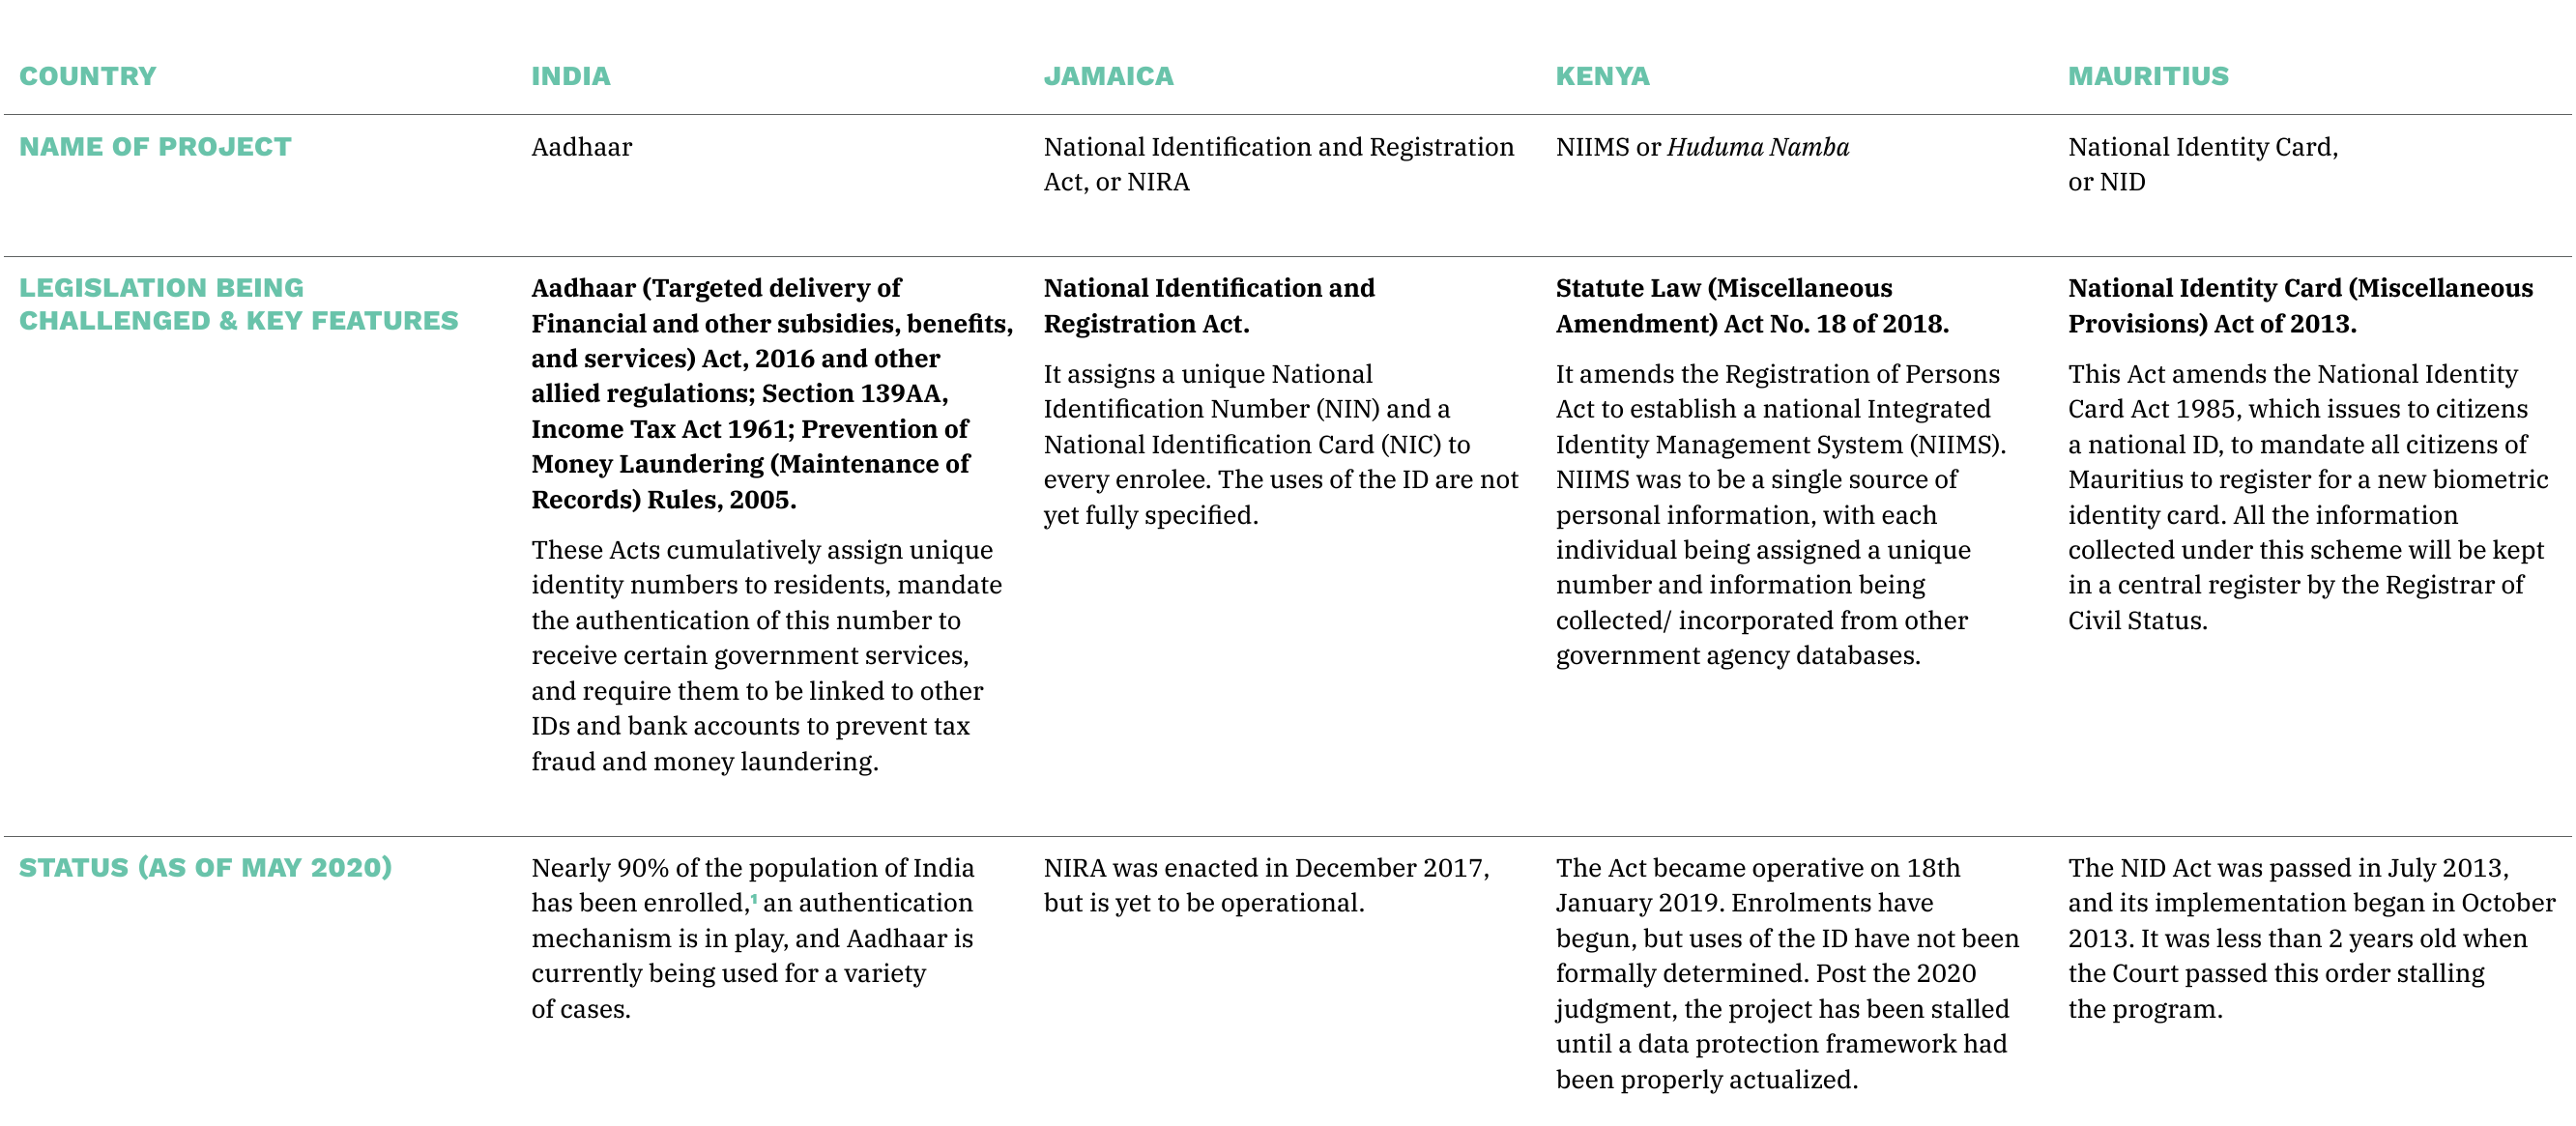 Appendix A. Comparison Chart of national digital ID programs in India, Jamaica, Kenya, and Mauritius